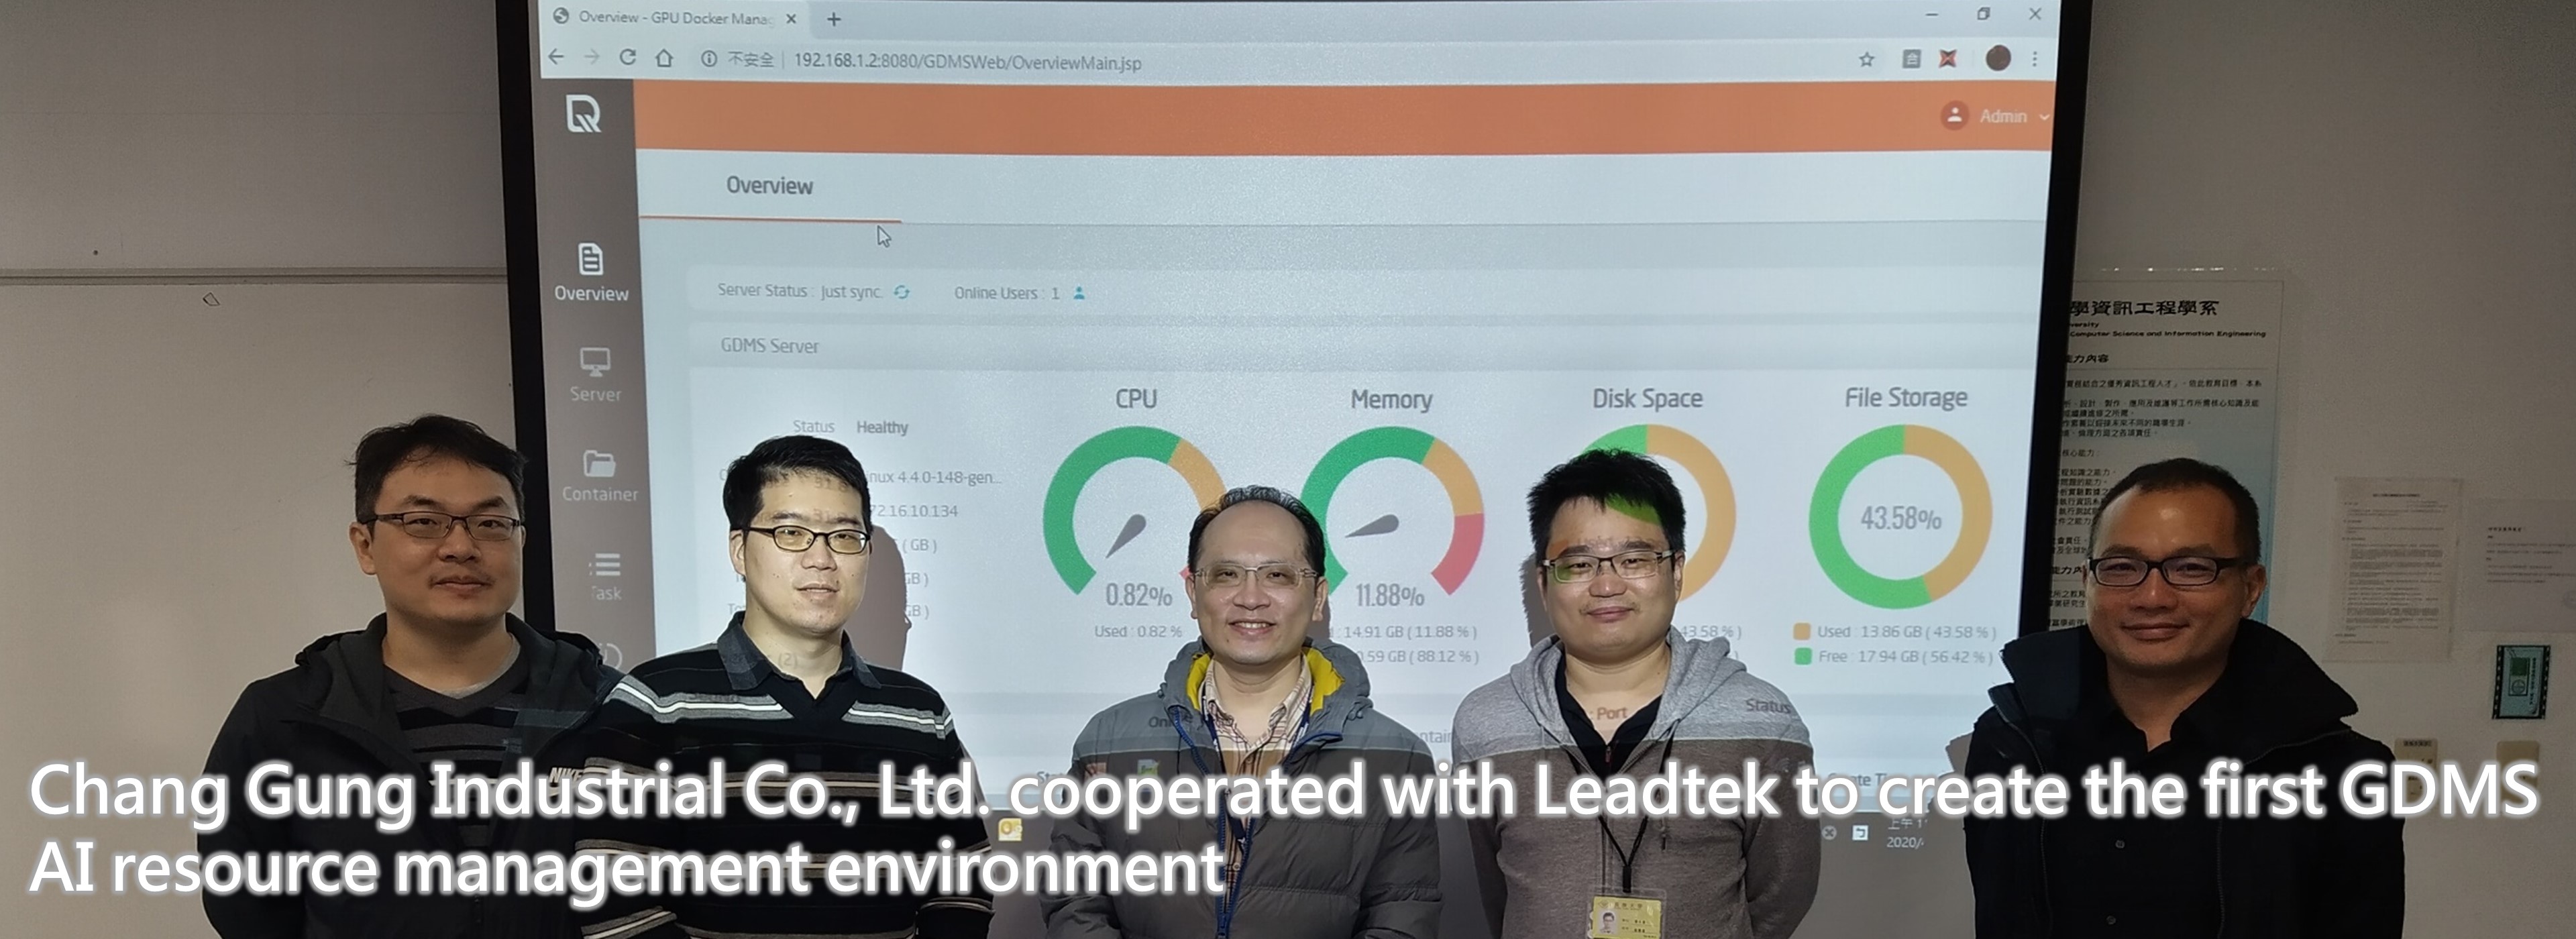 Chang Gung Industrial Co., Ltd. cooperated with Leadtek to create the first GDMS AI resource management environment